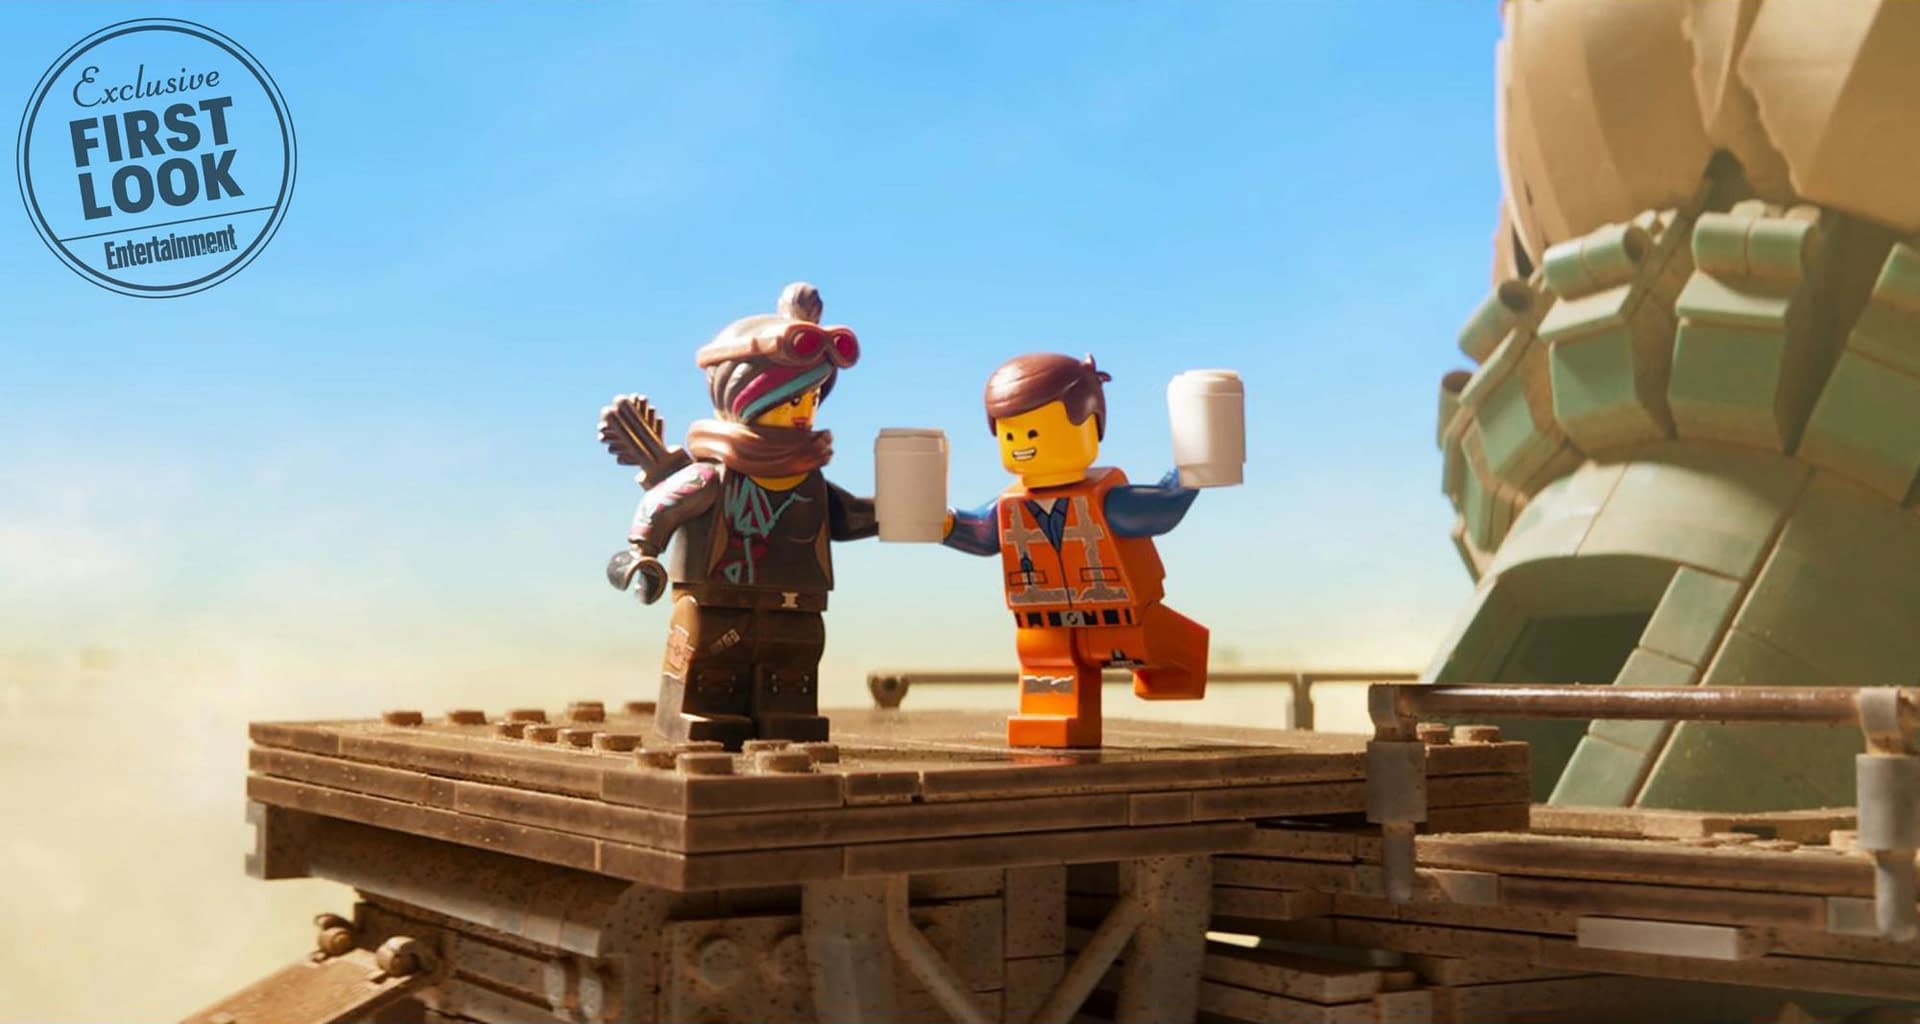 Time for Expensive Coffee in This New Image from The Lego Movie 2: The Second Part